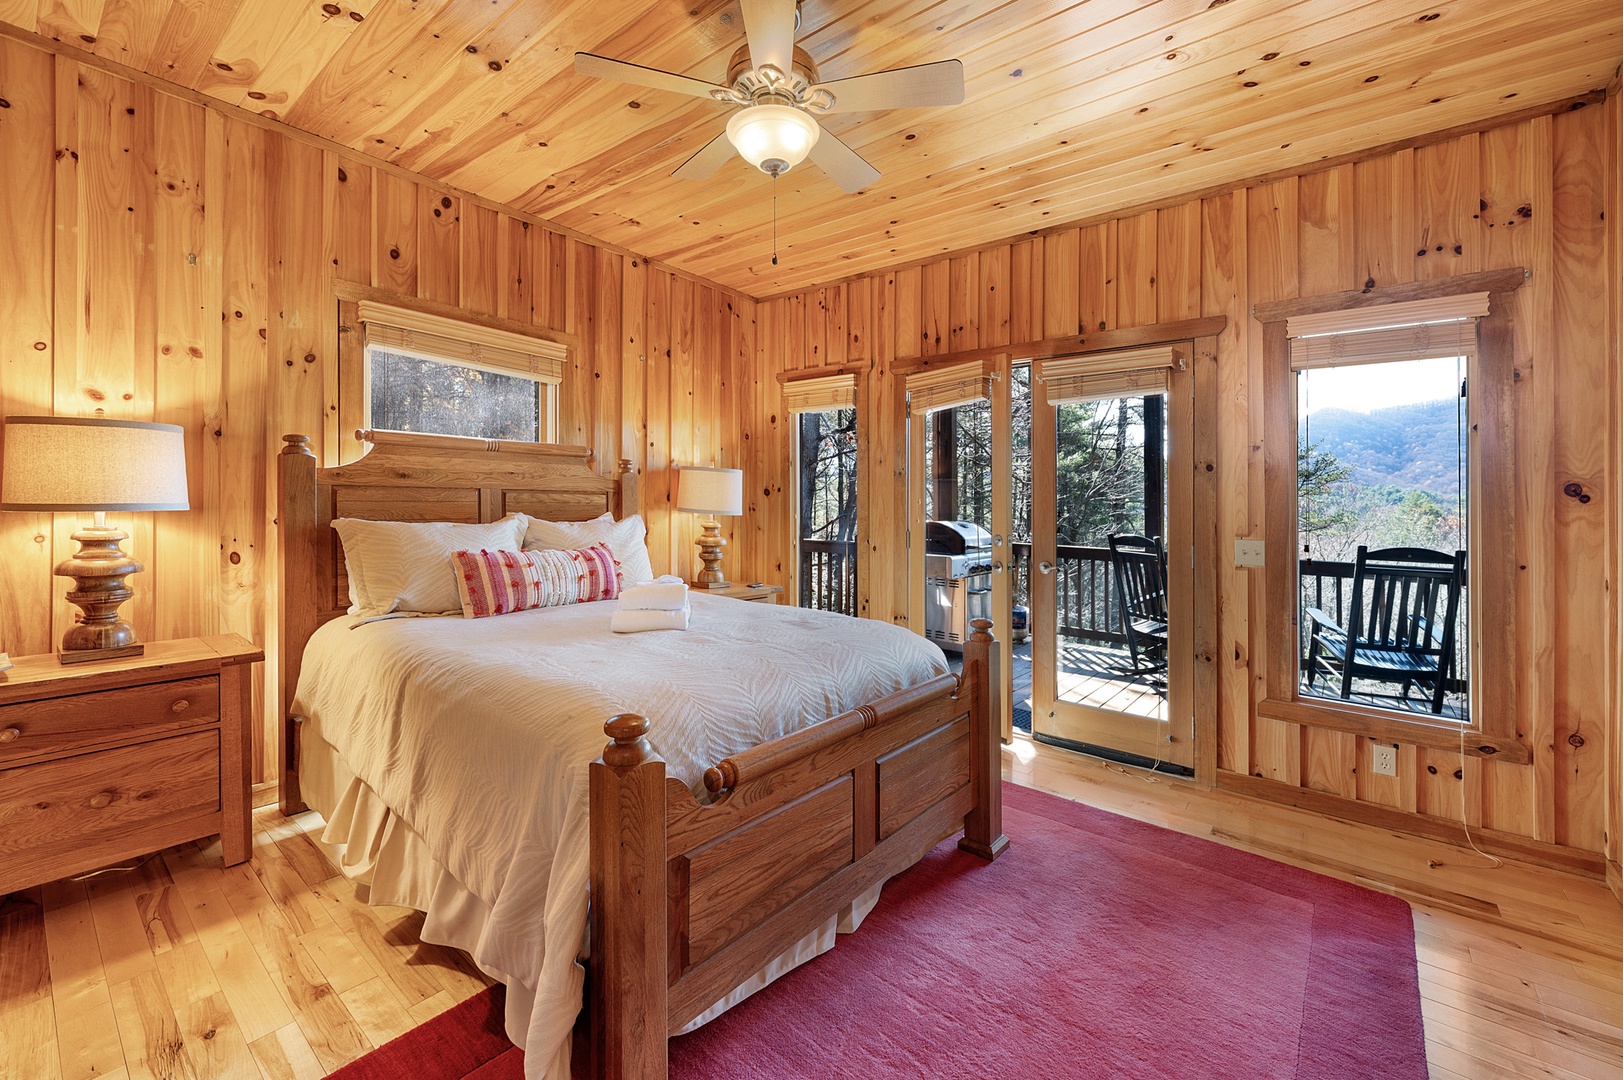 Cohutta Hideaway - Entry Level Guest Bedroom